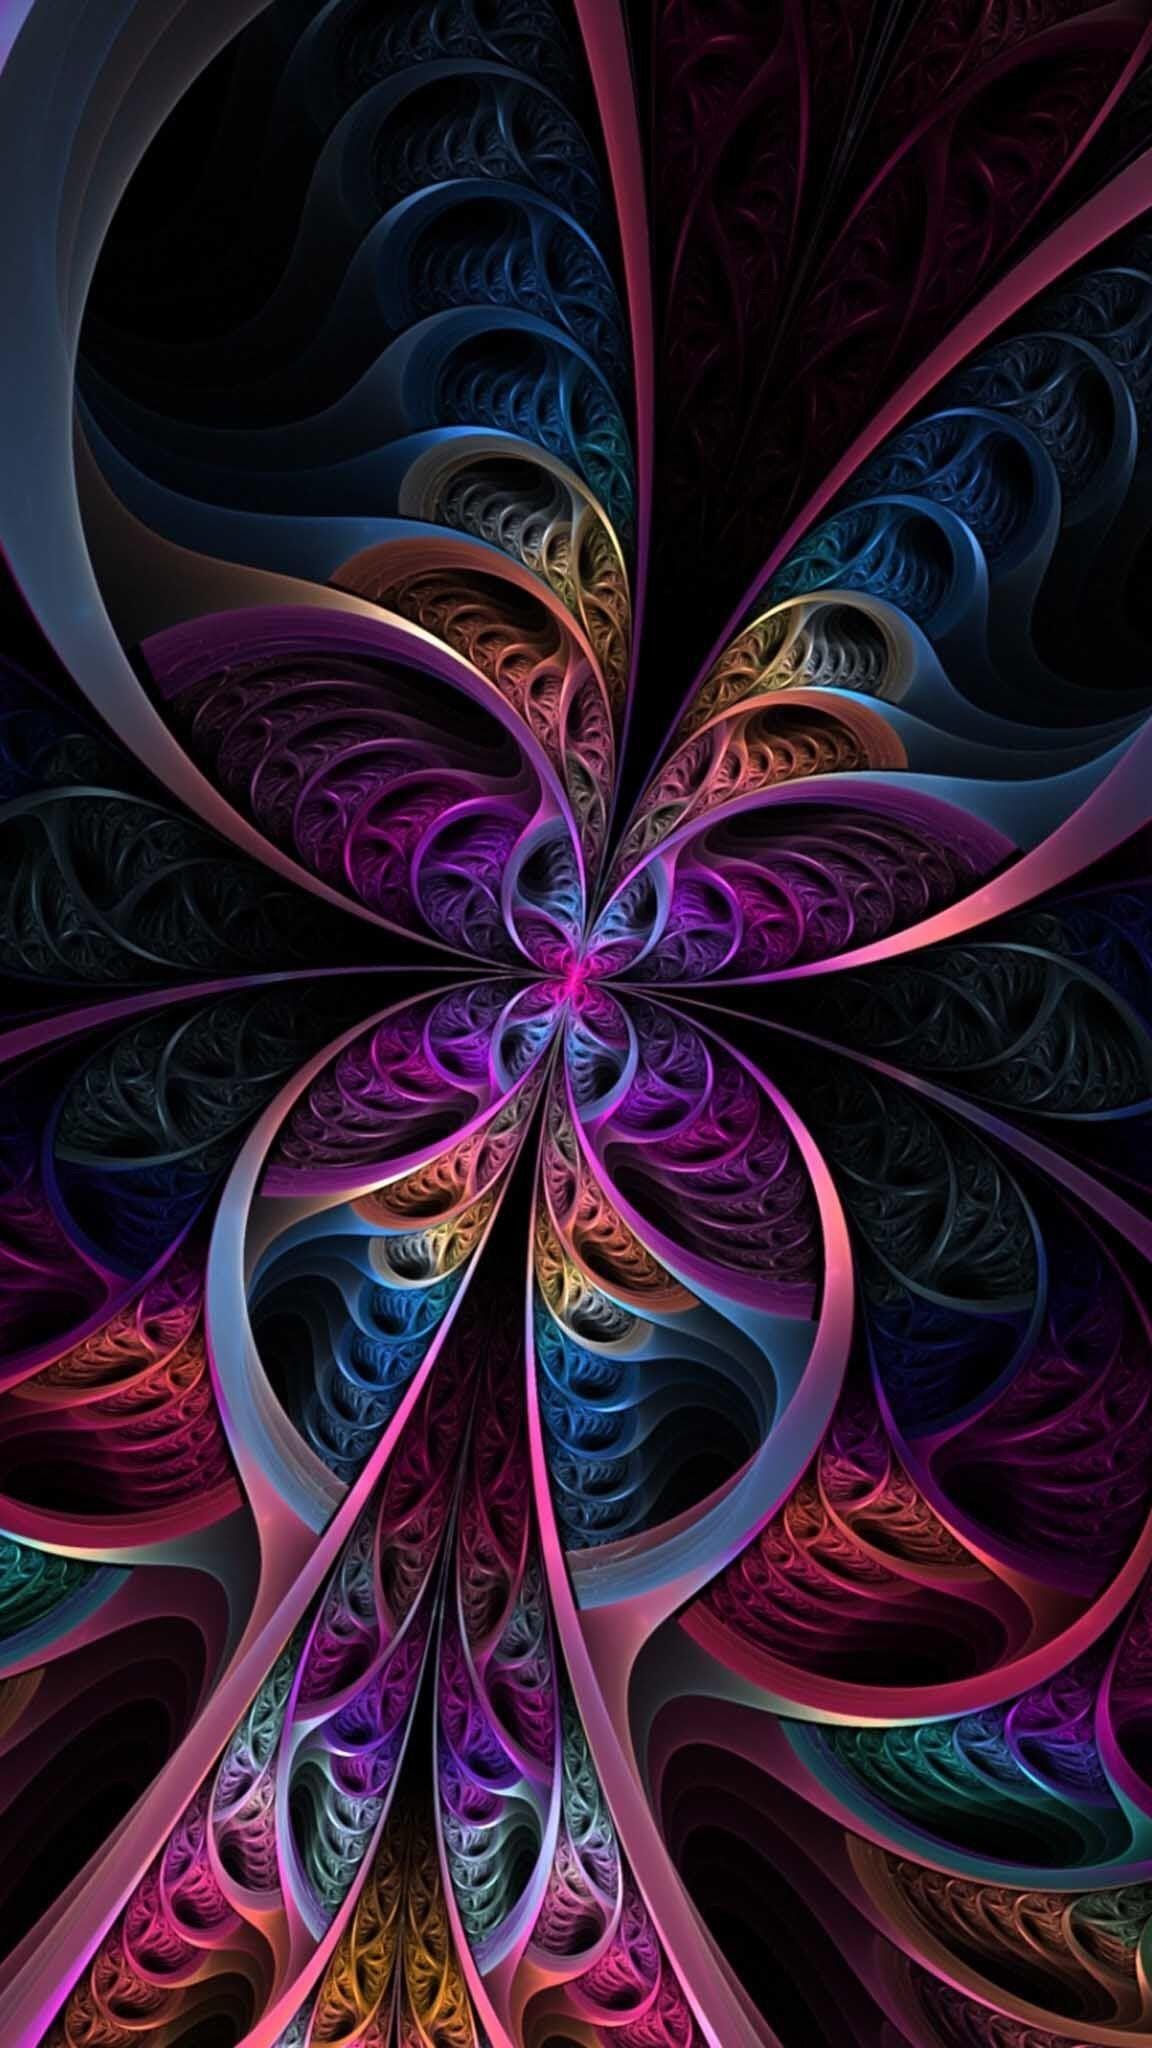 A graceful fractal image shaped like a butteryfly, with all the colors of the rainbow